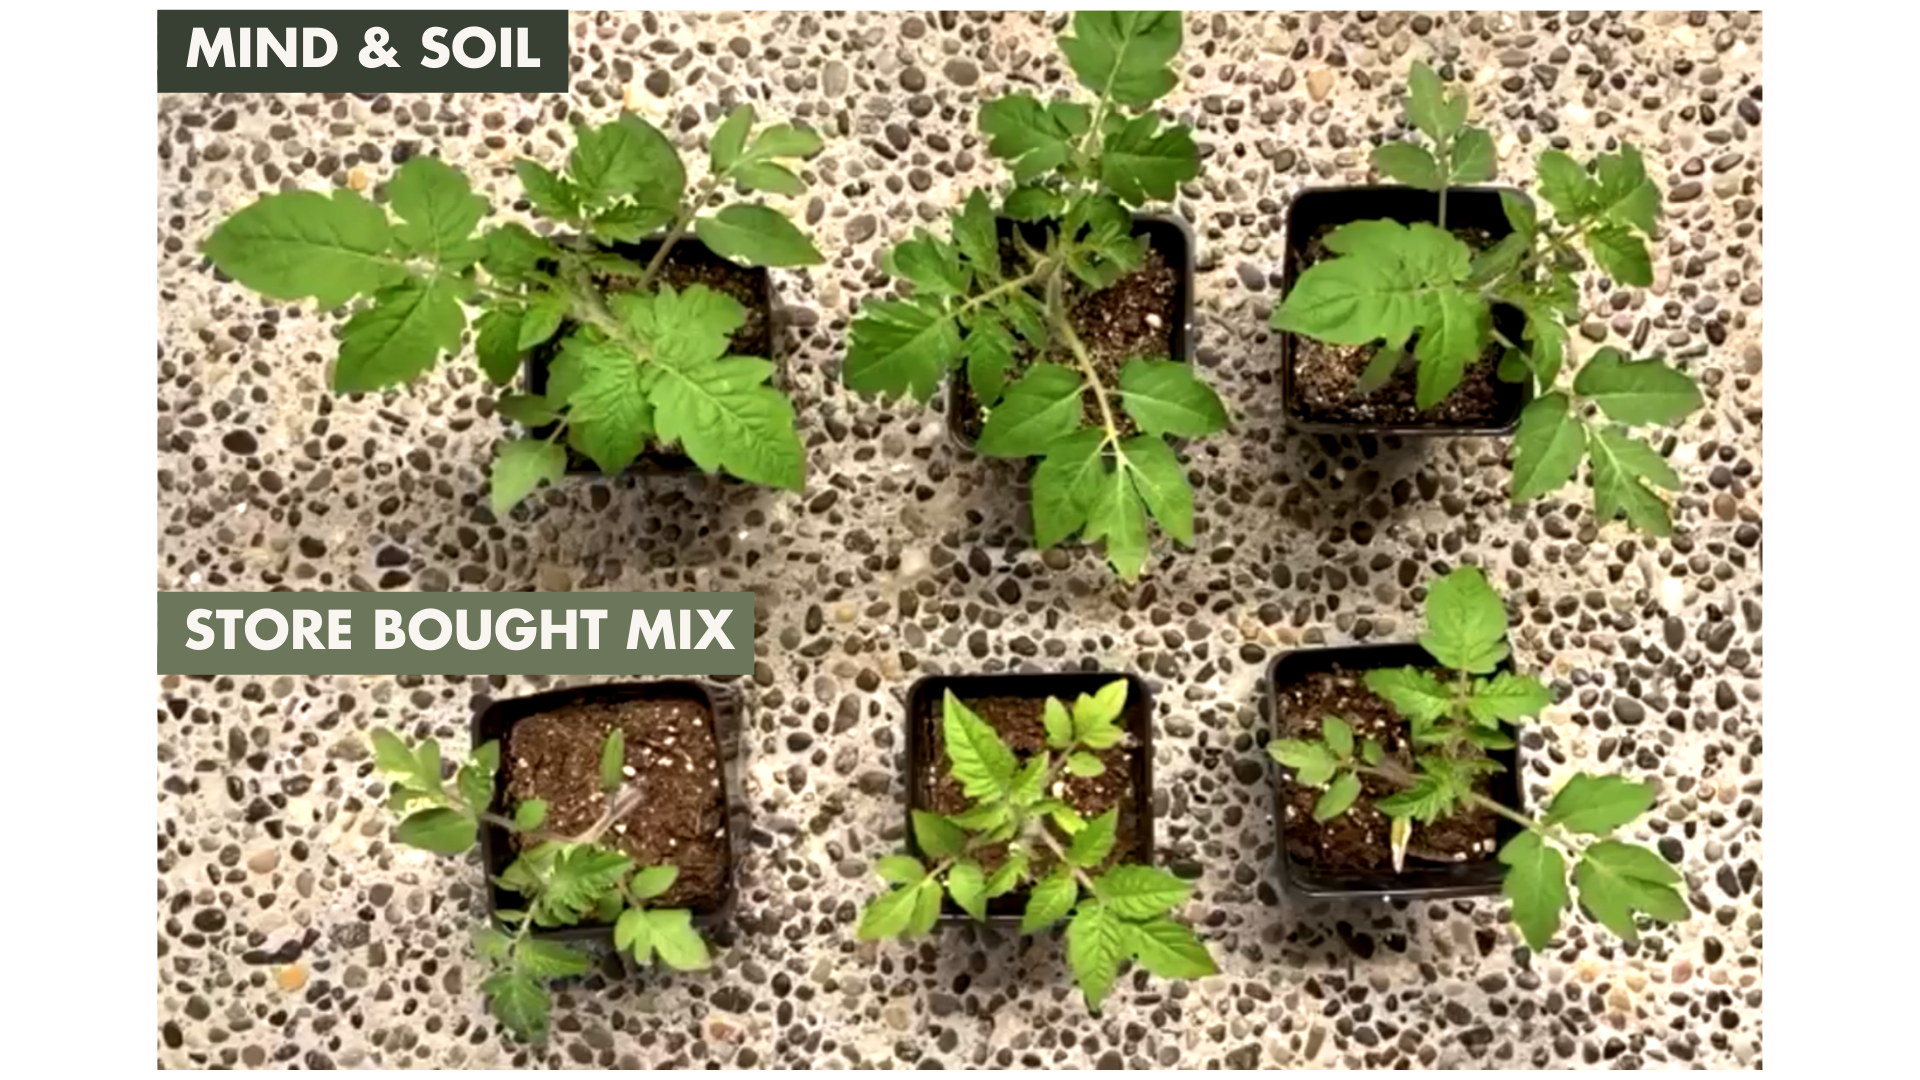 Image of seedlings growing much larger in Mind & Soil's Worm Casting Seedling Mix